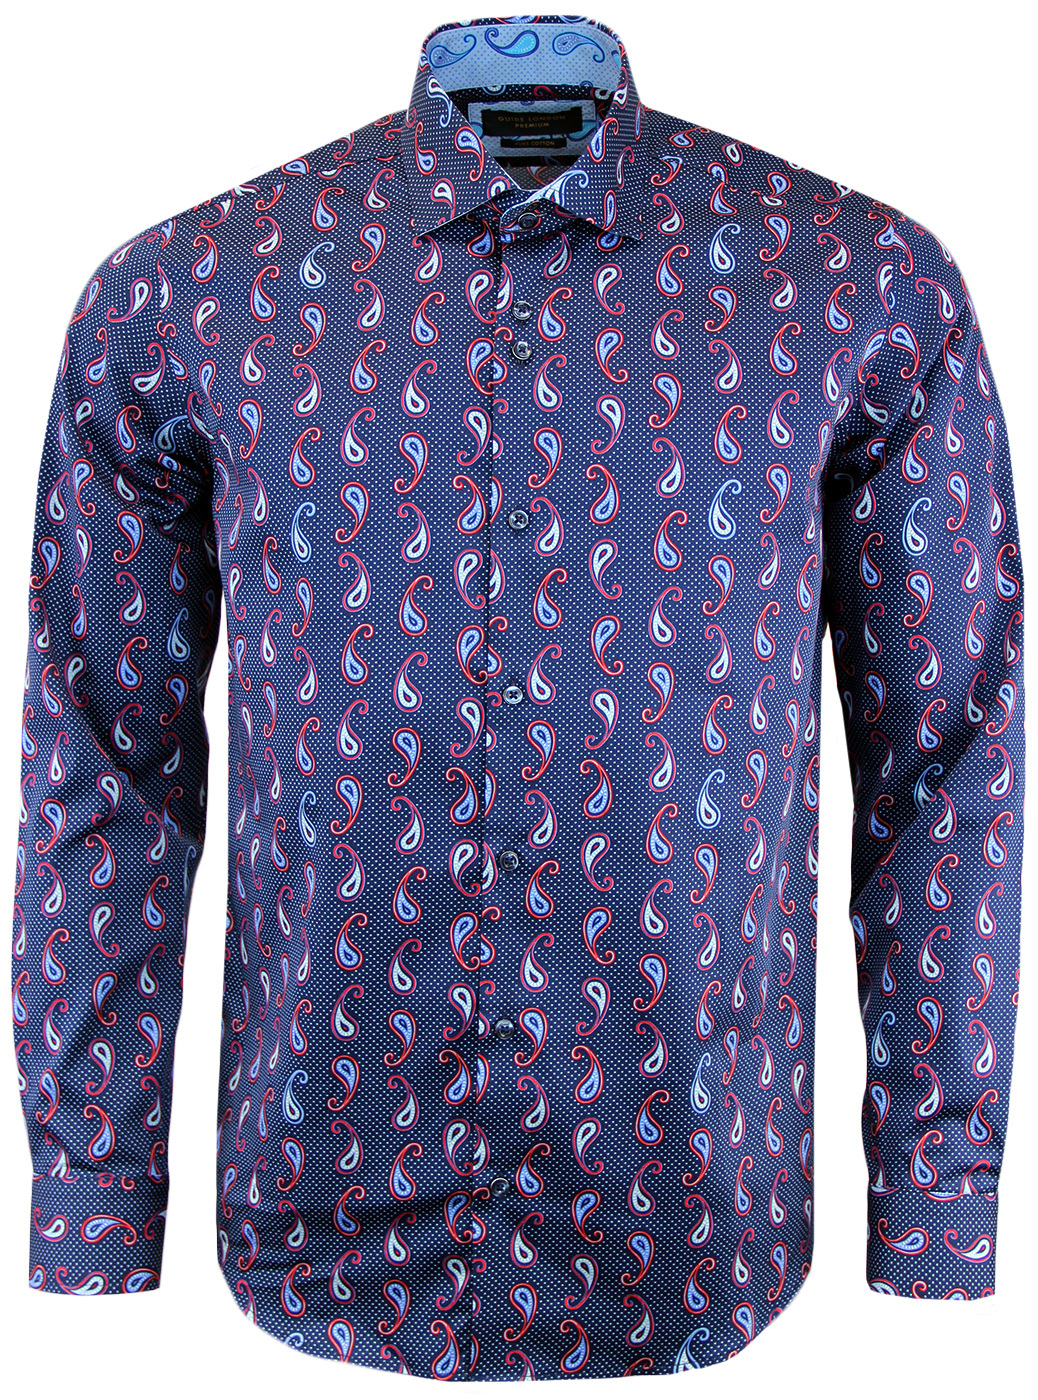 GUIDE LONDON Retro 1960s Mod Paisley Micro Square Shirt in Navy